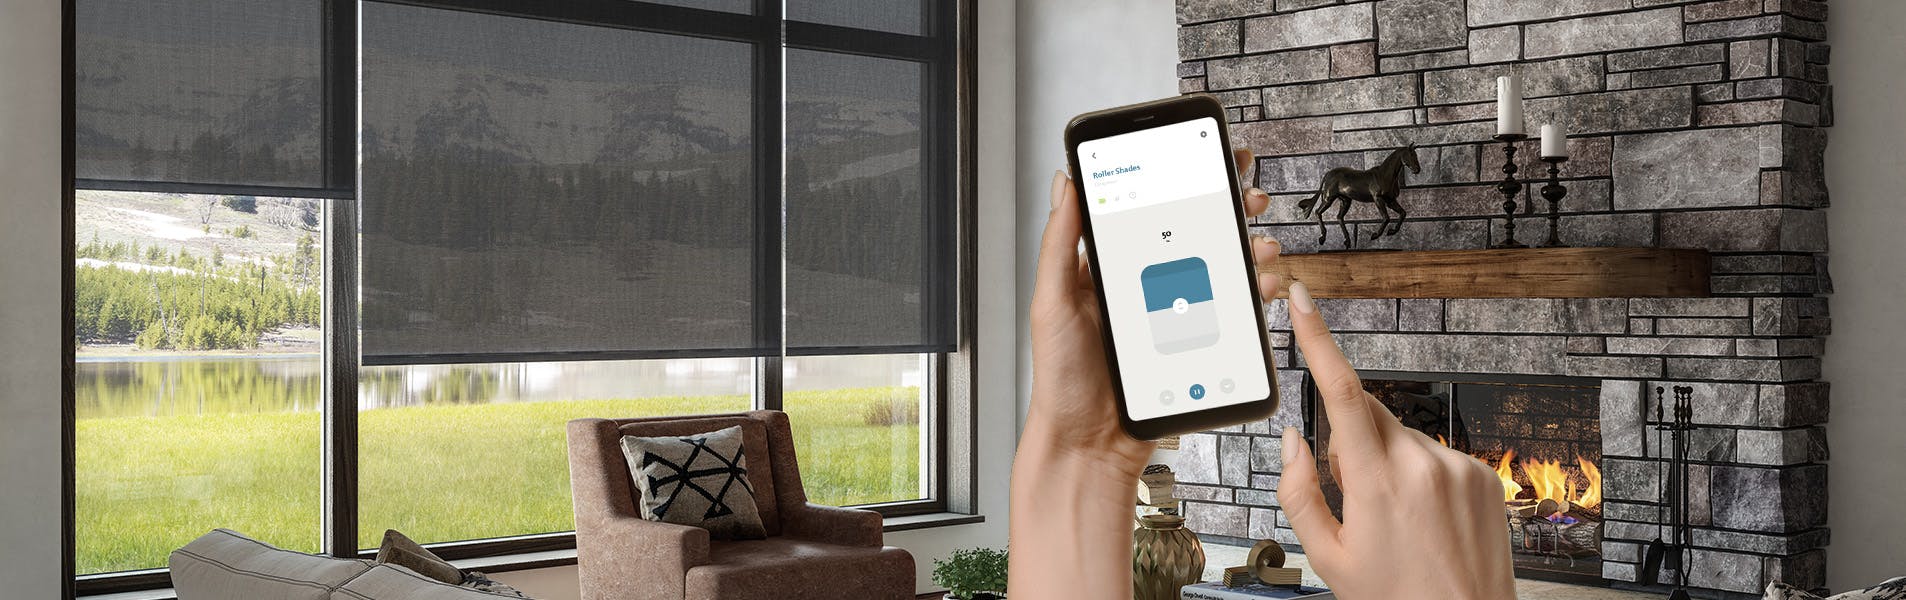 Hands controlling Roller Shades with the BLISS Automation App